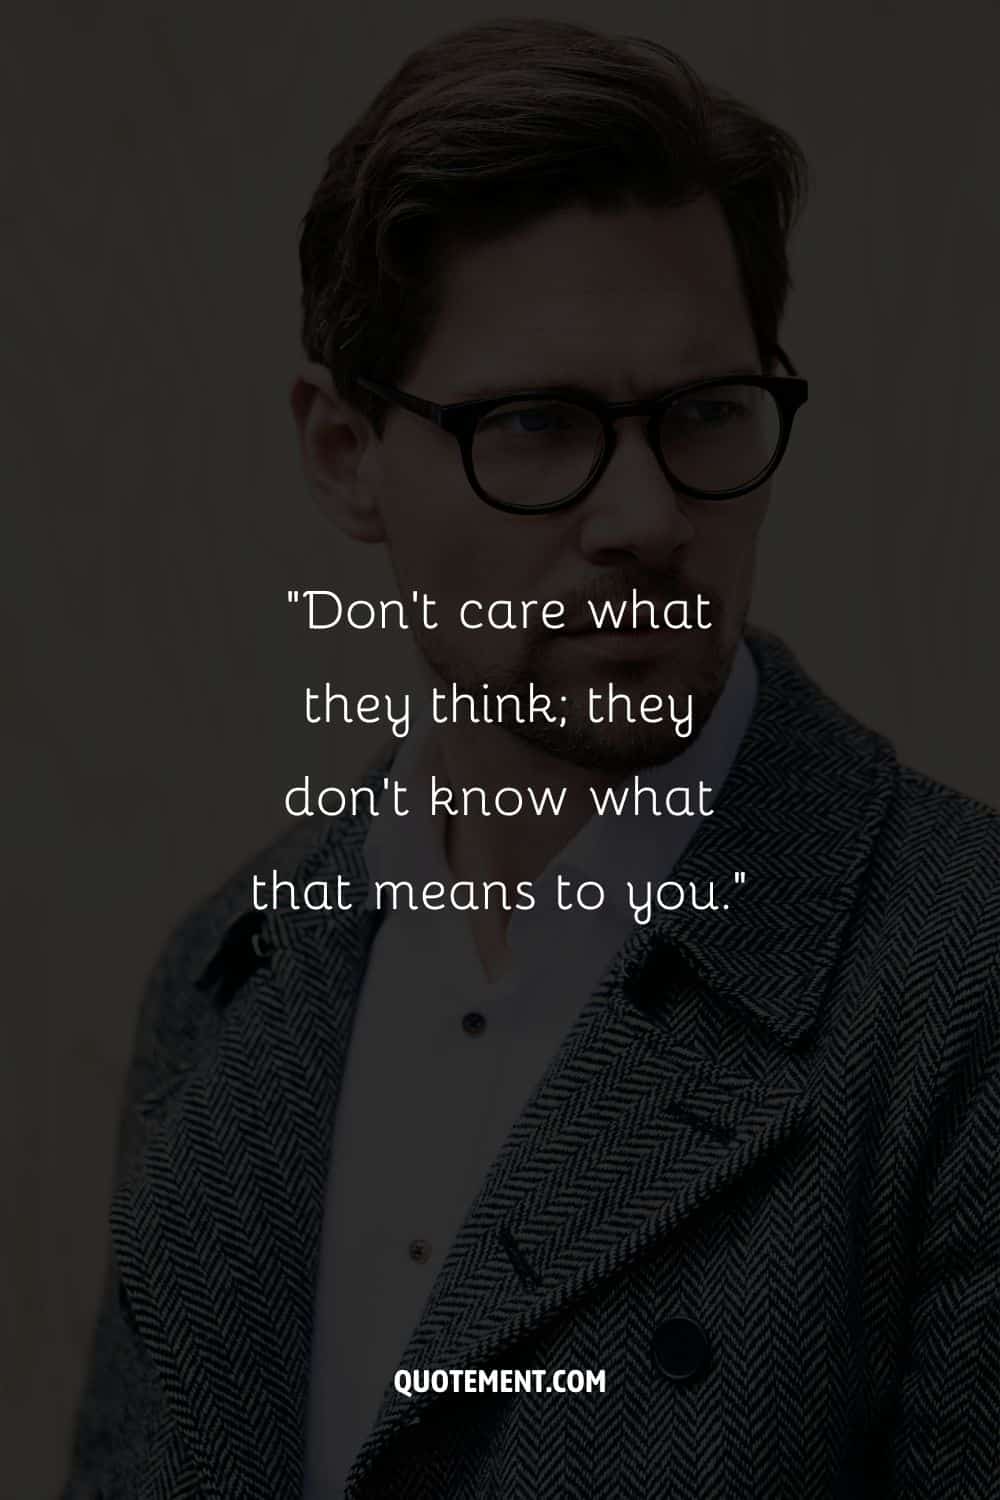 “Don’t care what they think; they don’t know what that means to you.”